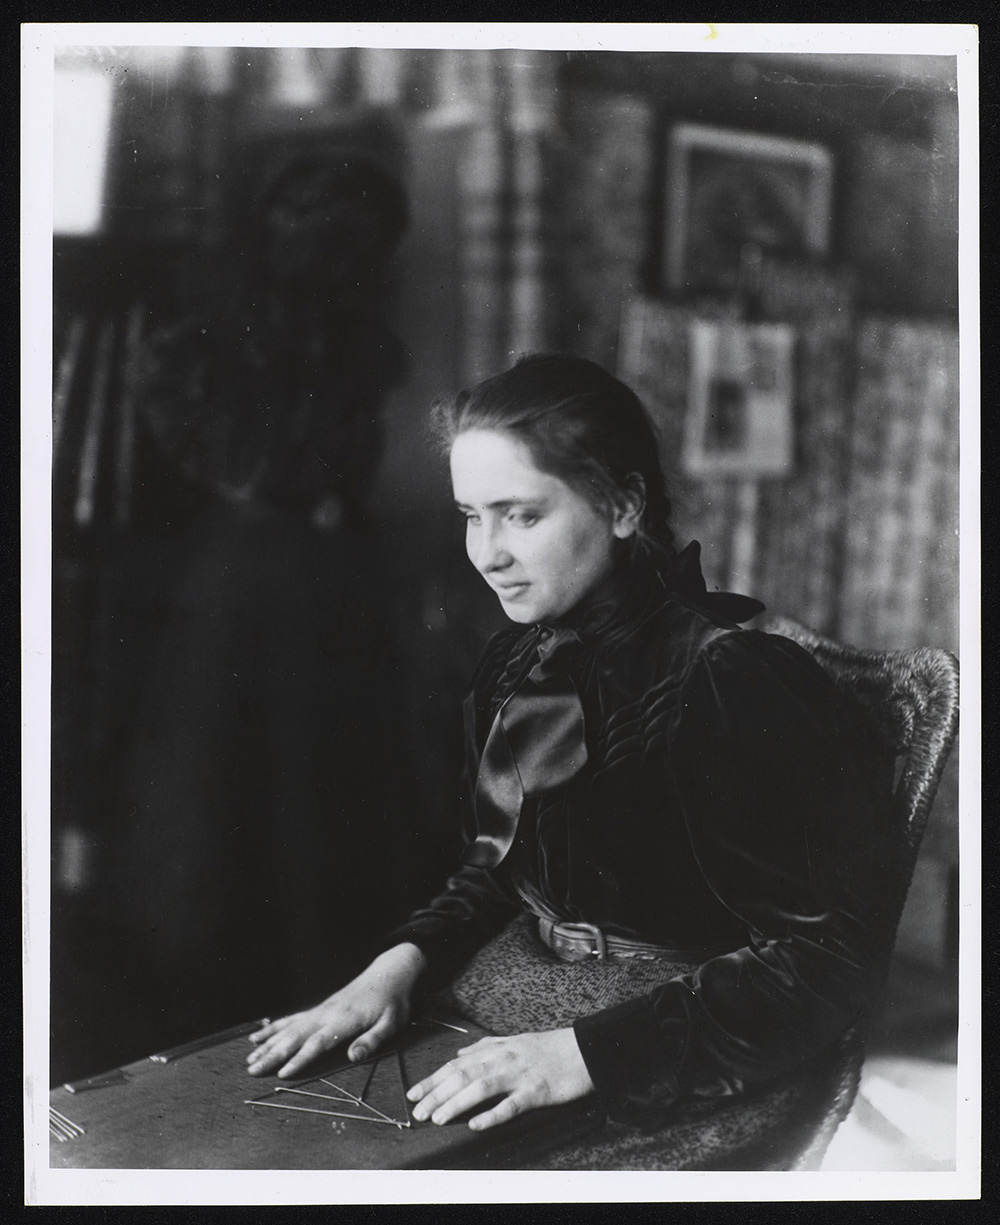 Helen Keller is seated alone studying geometry at Radcliffe College. Keller has a board on her lap and her hands are touching rods that are arranged in a triangular geometric pattern. She is wearing a dress that appears to have a dark satin-like upper body, with a wool-type fabric bottom part.The outfit has sleeves that are tight from wrist to elbow and puffy from elbow to shoulder. The flouncy collar reaches high up her neck. Her hair is lightly pulled back into a single braid with a bow just barely visible. 